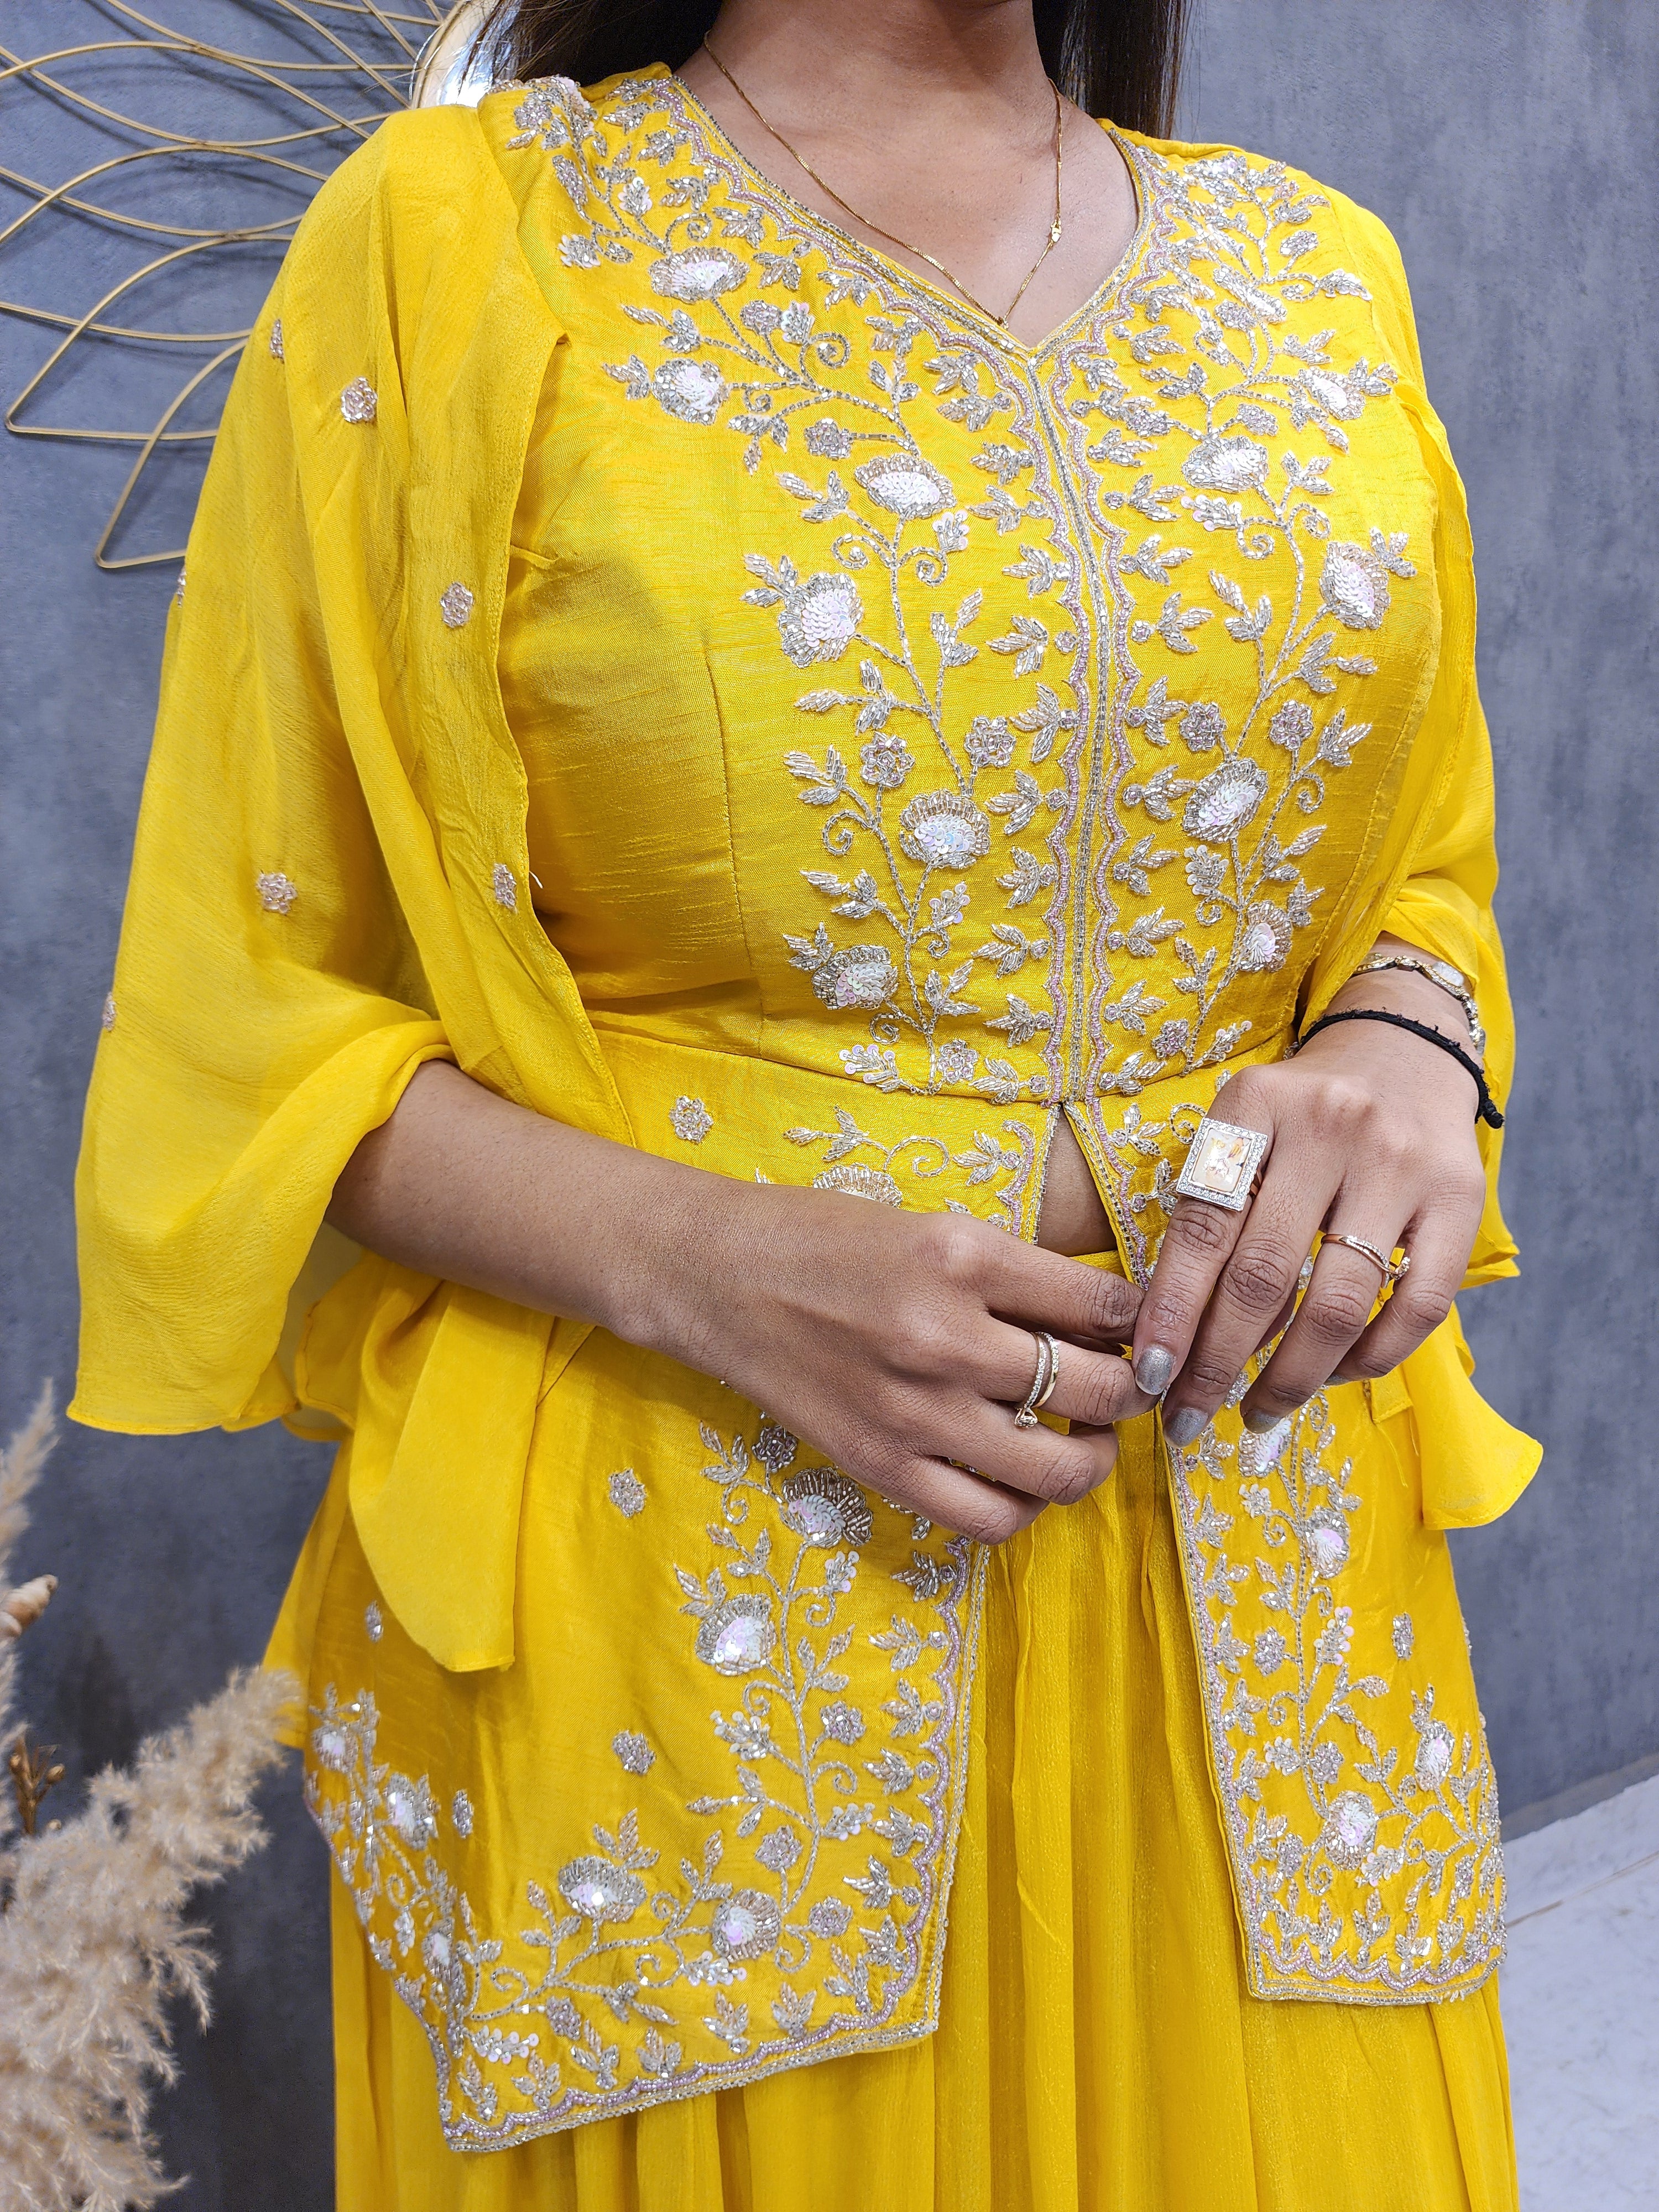 Buy Bright Yellow Dress With Peplum Top In Floral Motif Embroidery KALKI  Fashion India